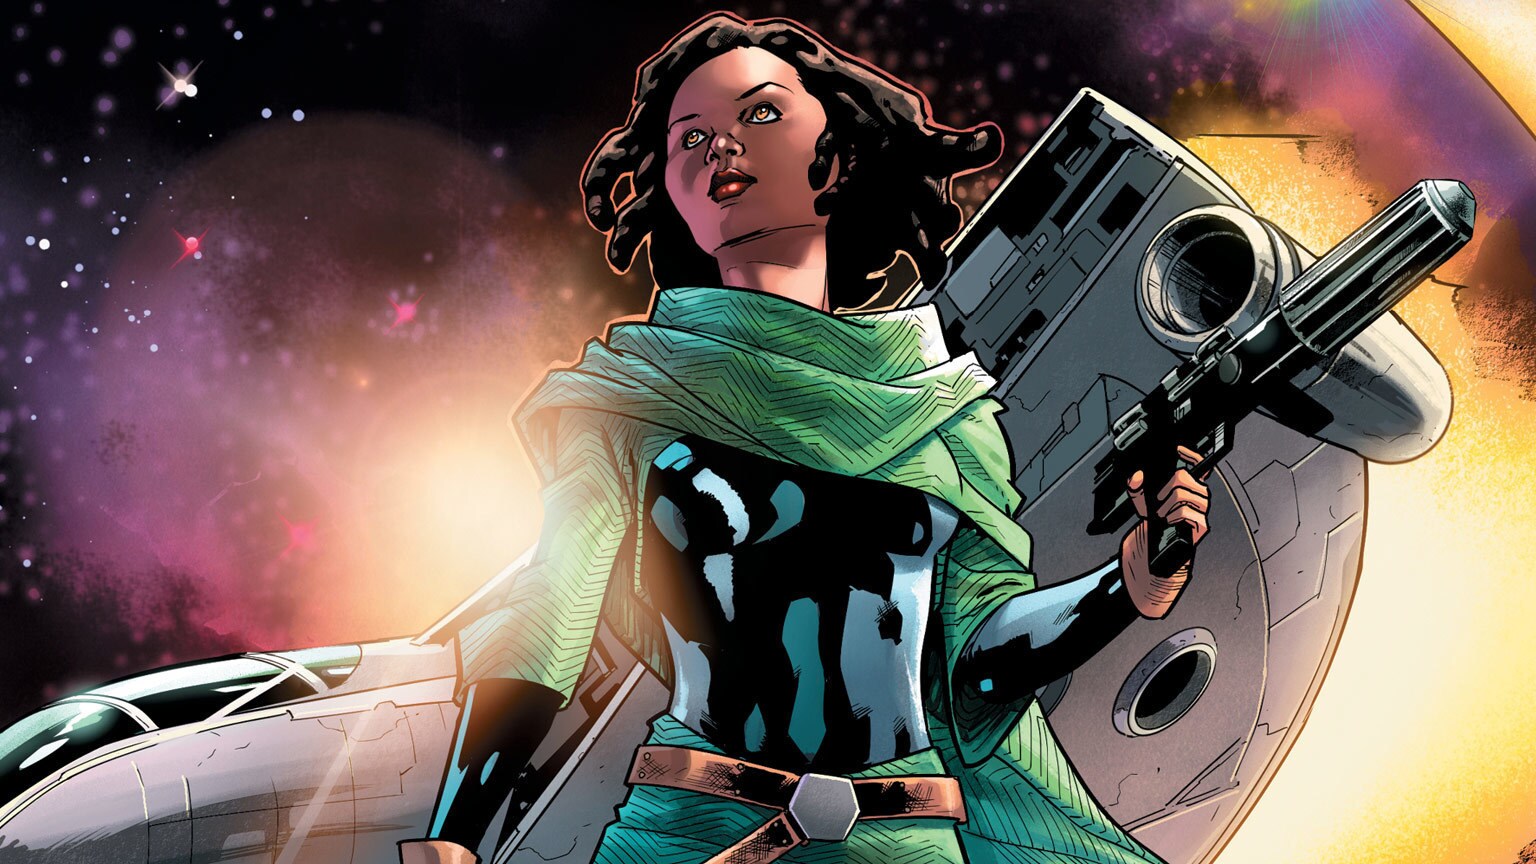 Marvel Celebrates Sana Starros and More in Star Wars Pride Month Comics Covers this June